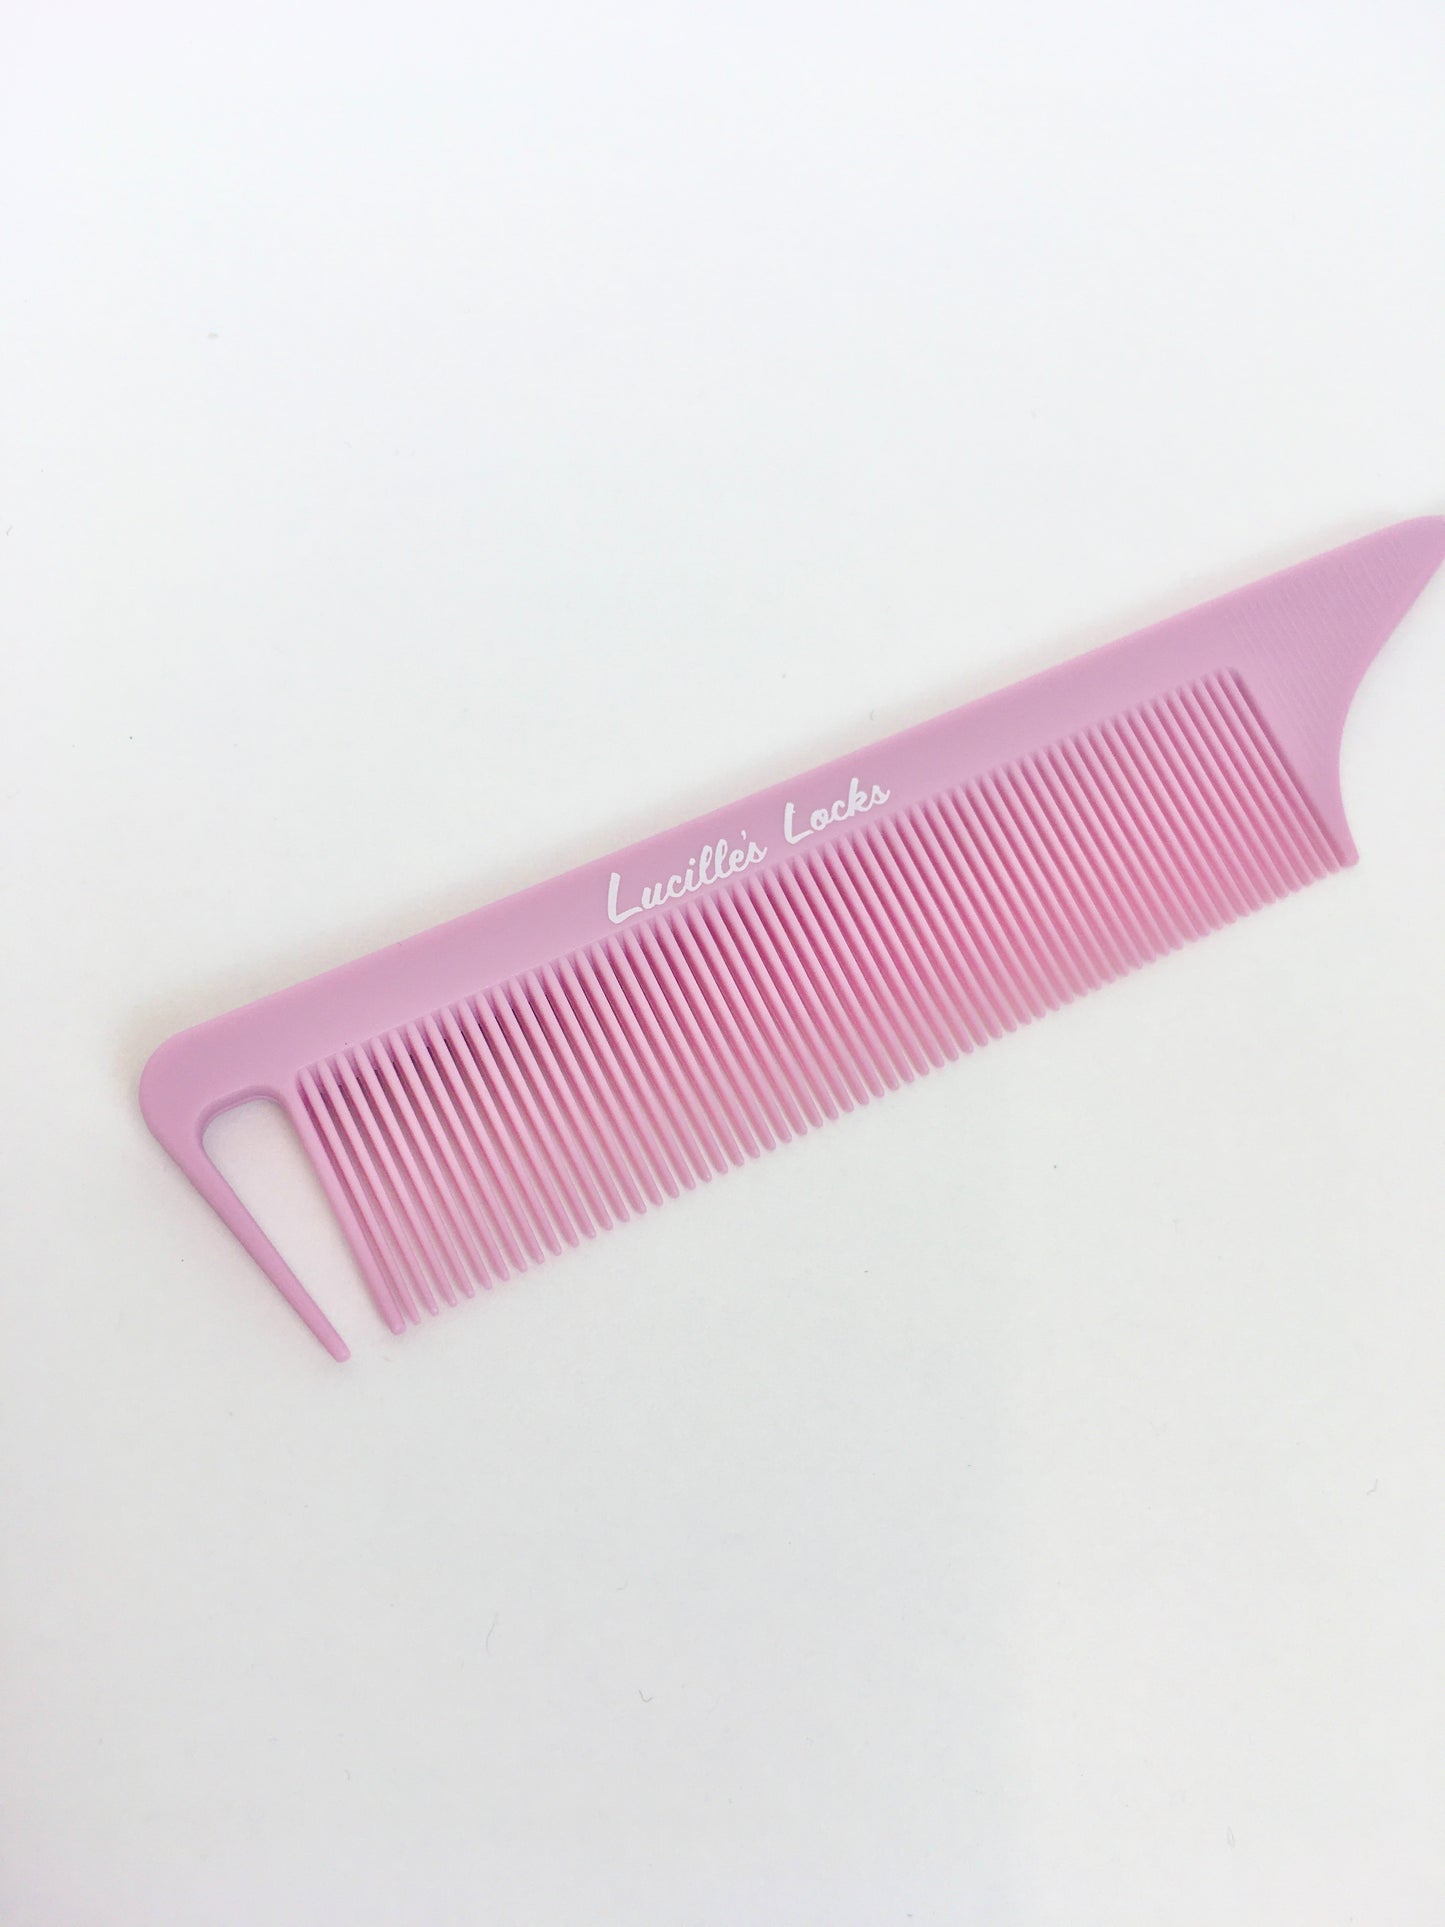 Lucille’s Locks Tail Comb - In Pink